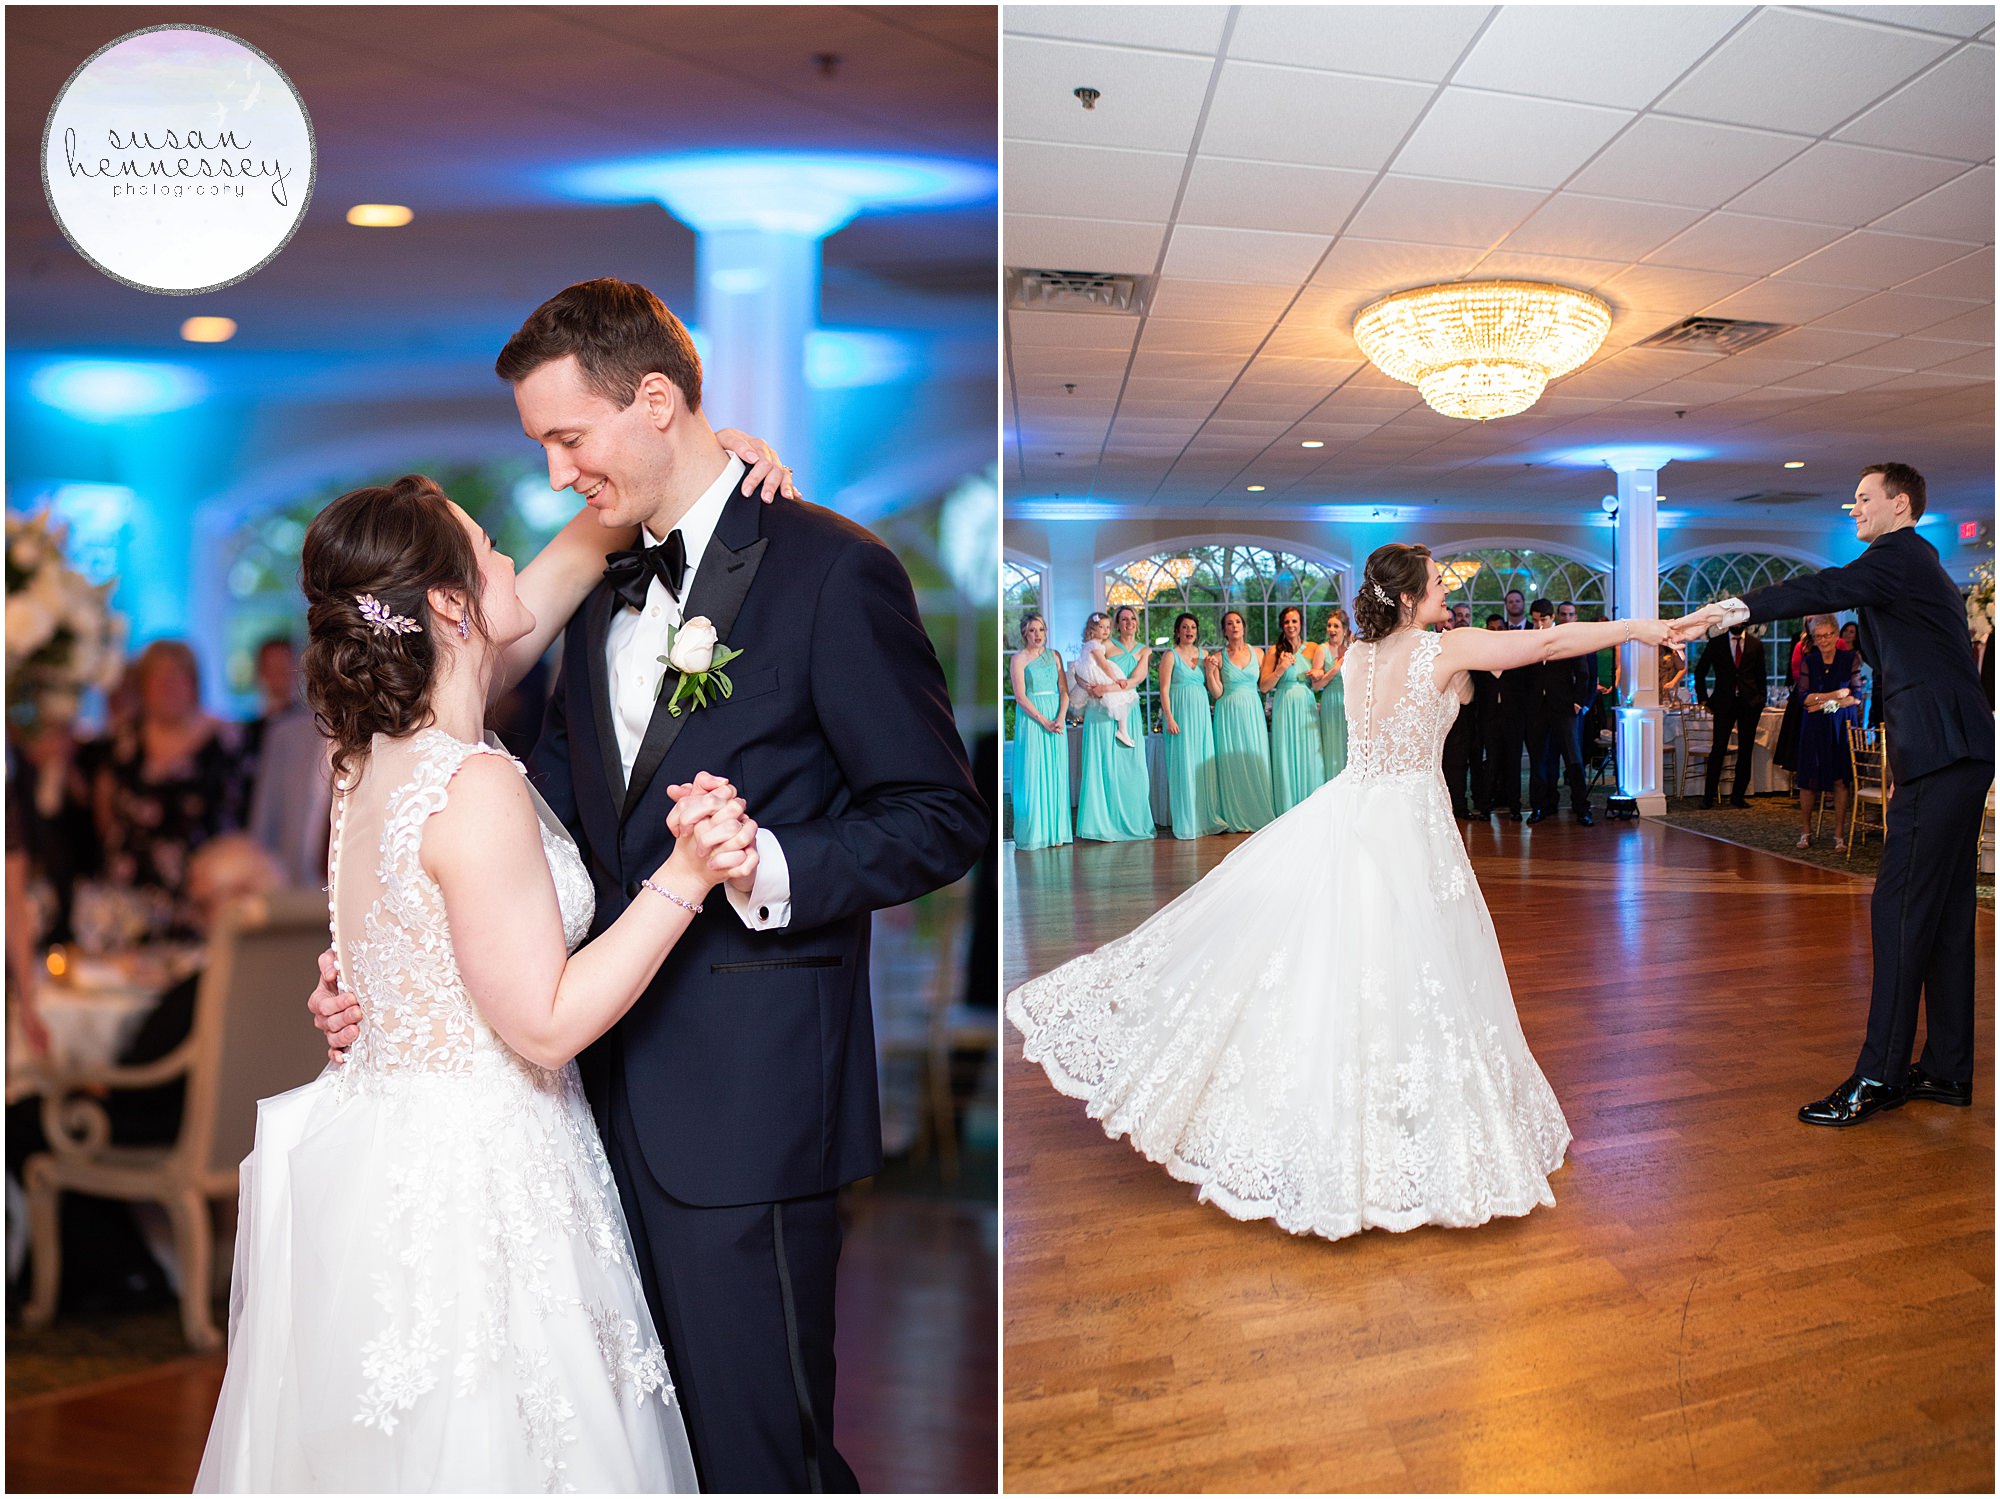 First dance for bride and groom at Bradford Estate wedding